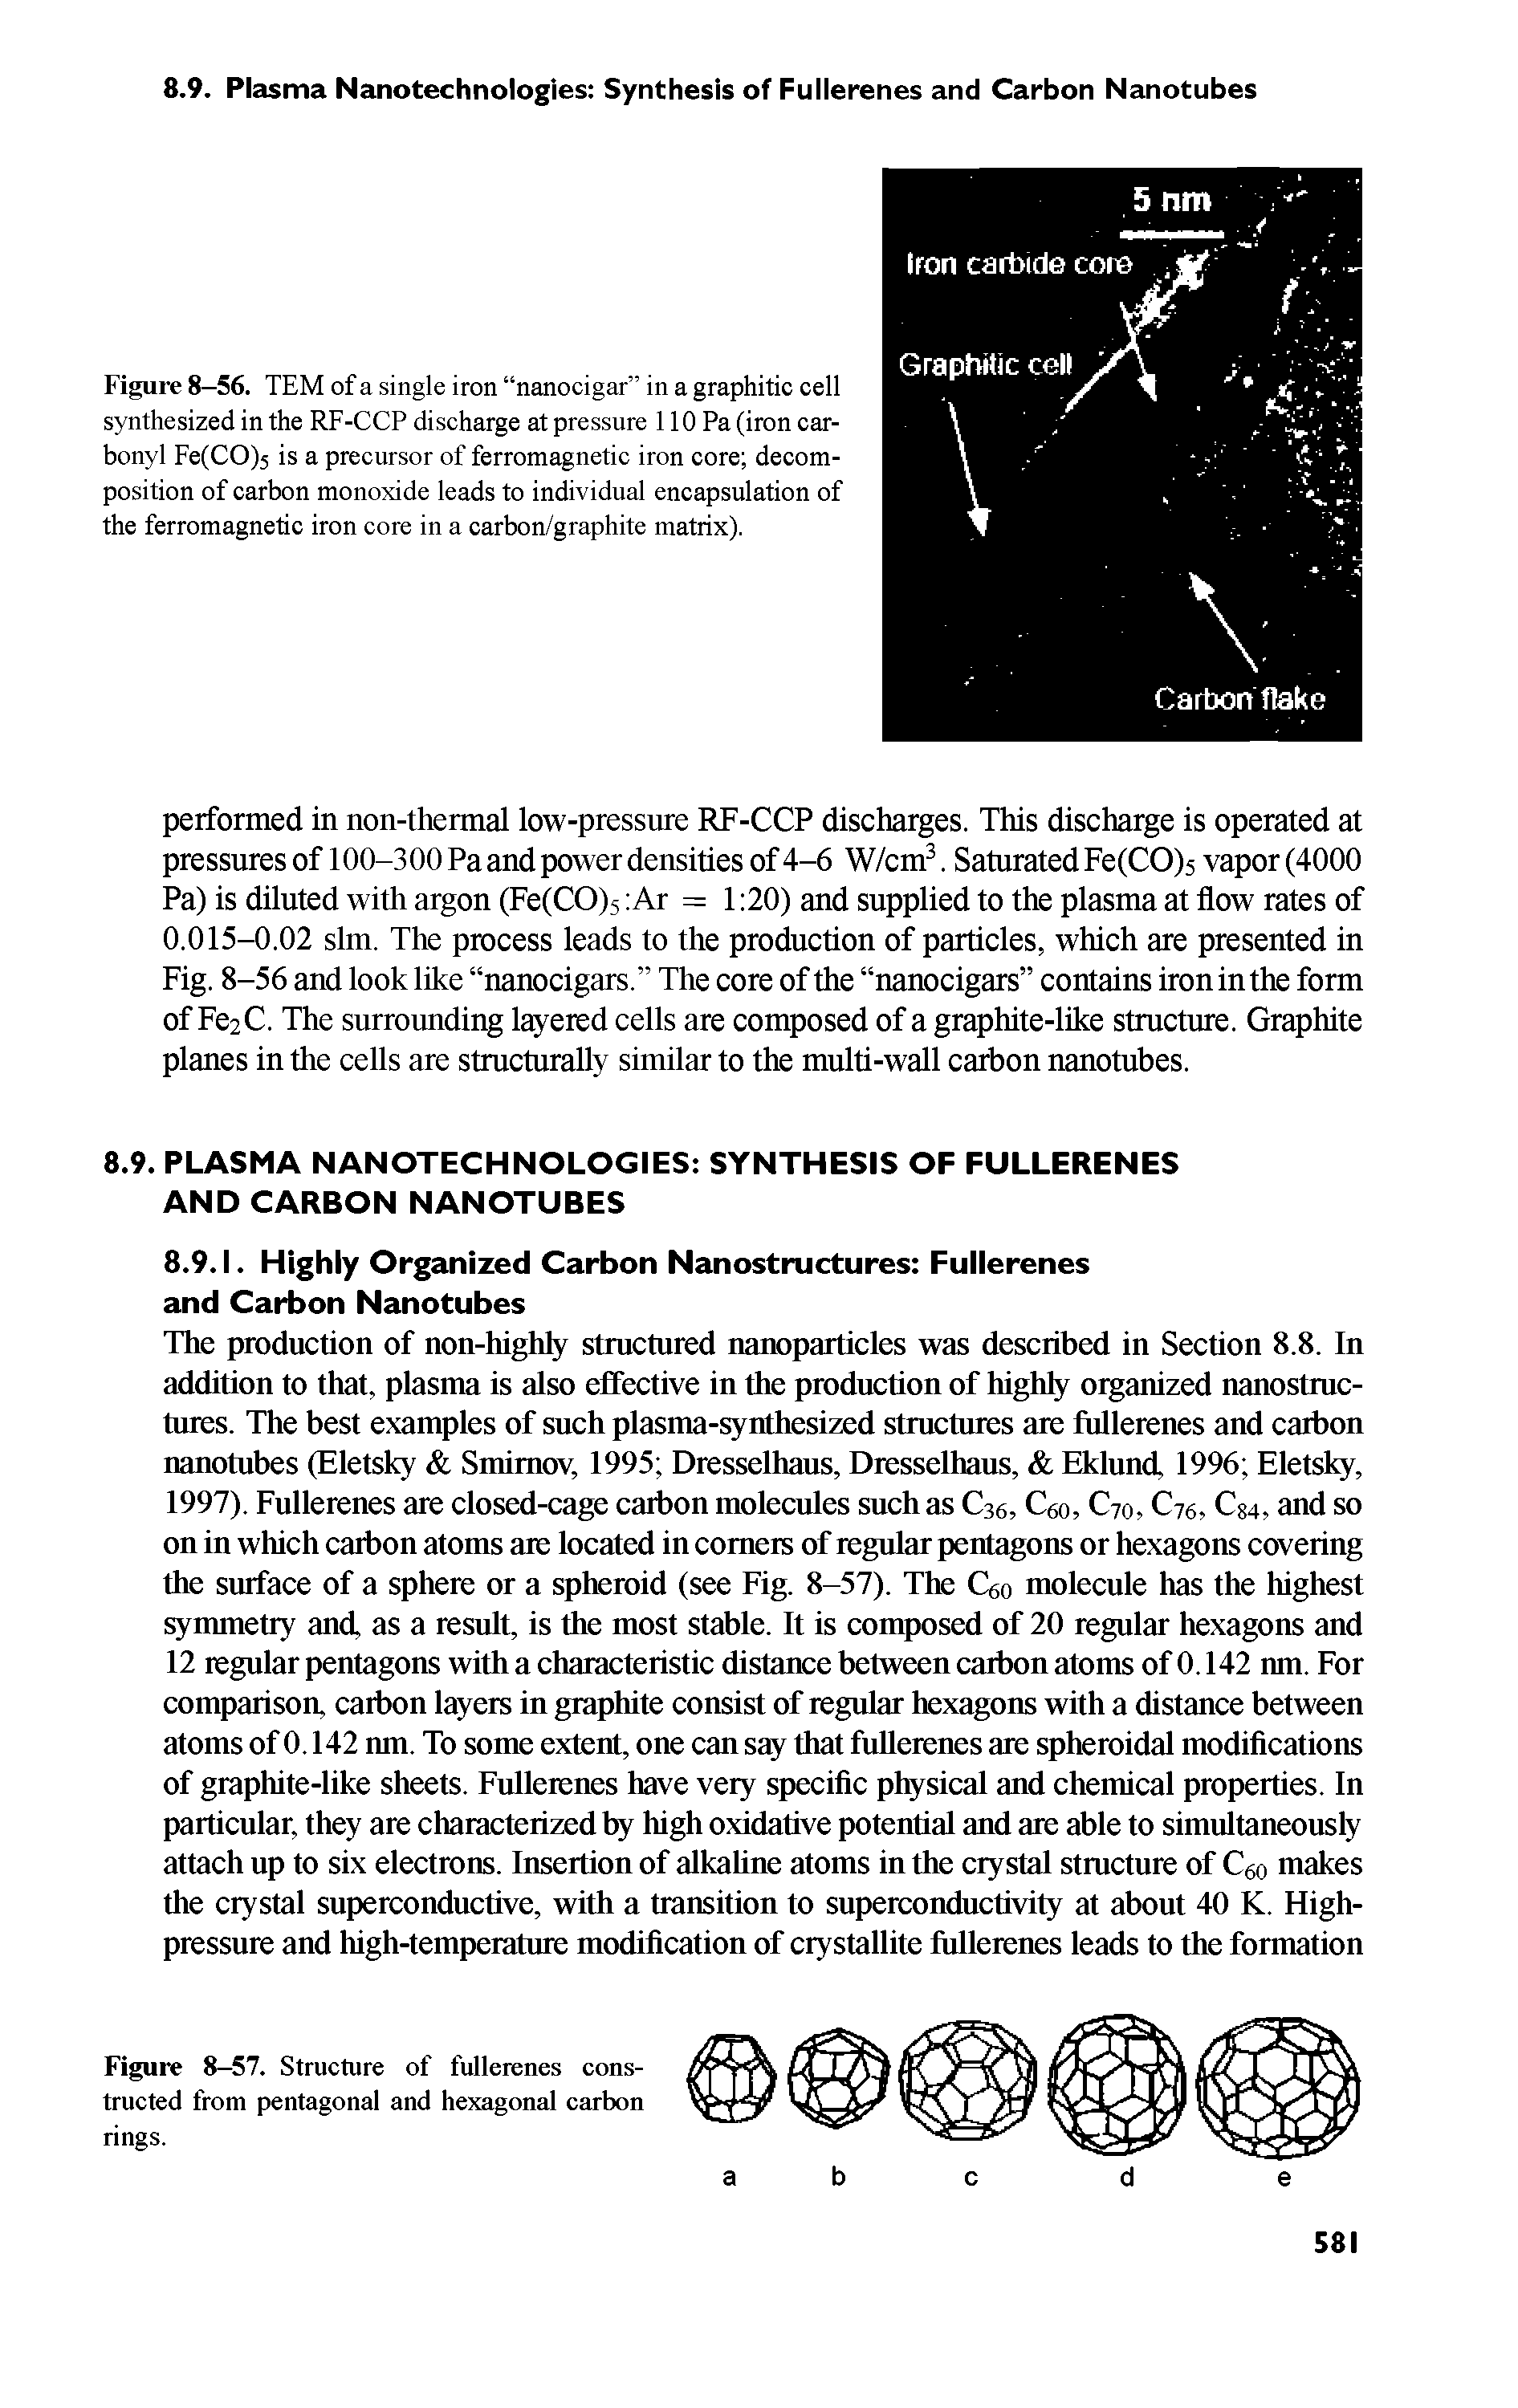 Figure 8-56. TEM of a single iron nanocigar in a graphitic cell synthesized in the RF-CCP discharge at pressure 110 Pa (iron carbonyl Fe(CO)5 is a precursor of ferromagnetic iron core decomposition of carbon monoxide leads to individual encapsulation of the ferromagnetic iron core in a carbon/graphite matrix).